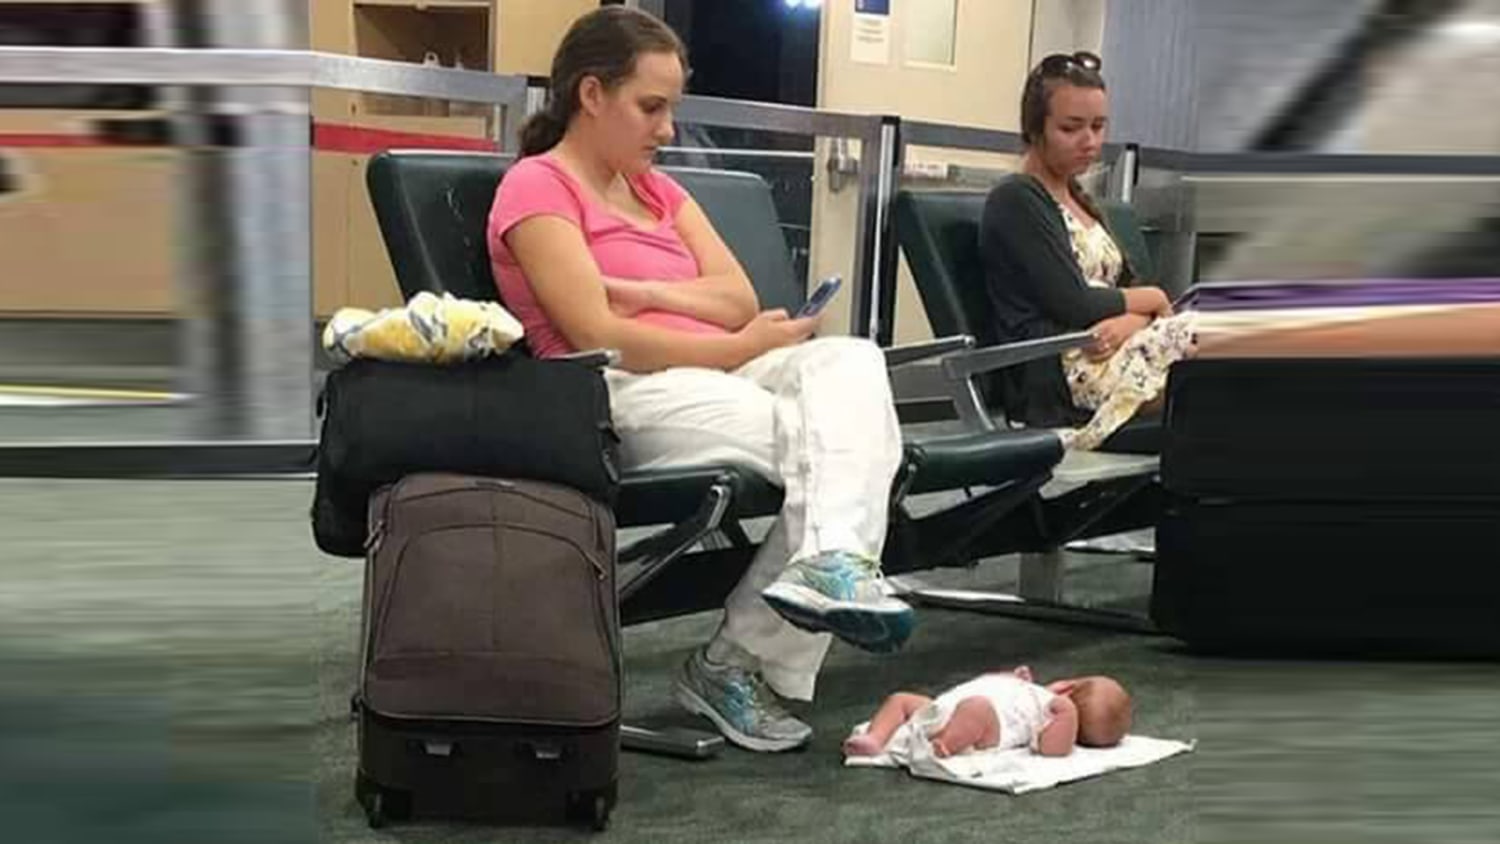 Photo of baby in bag goes viral